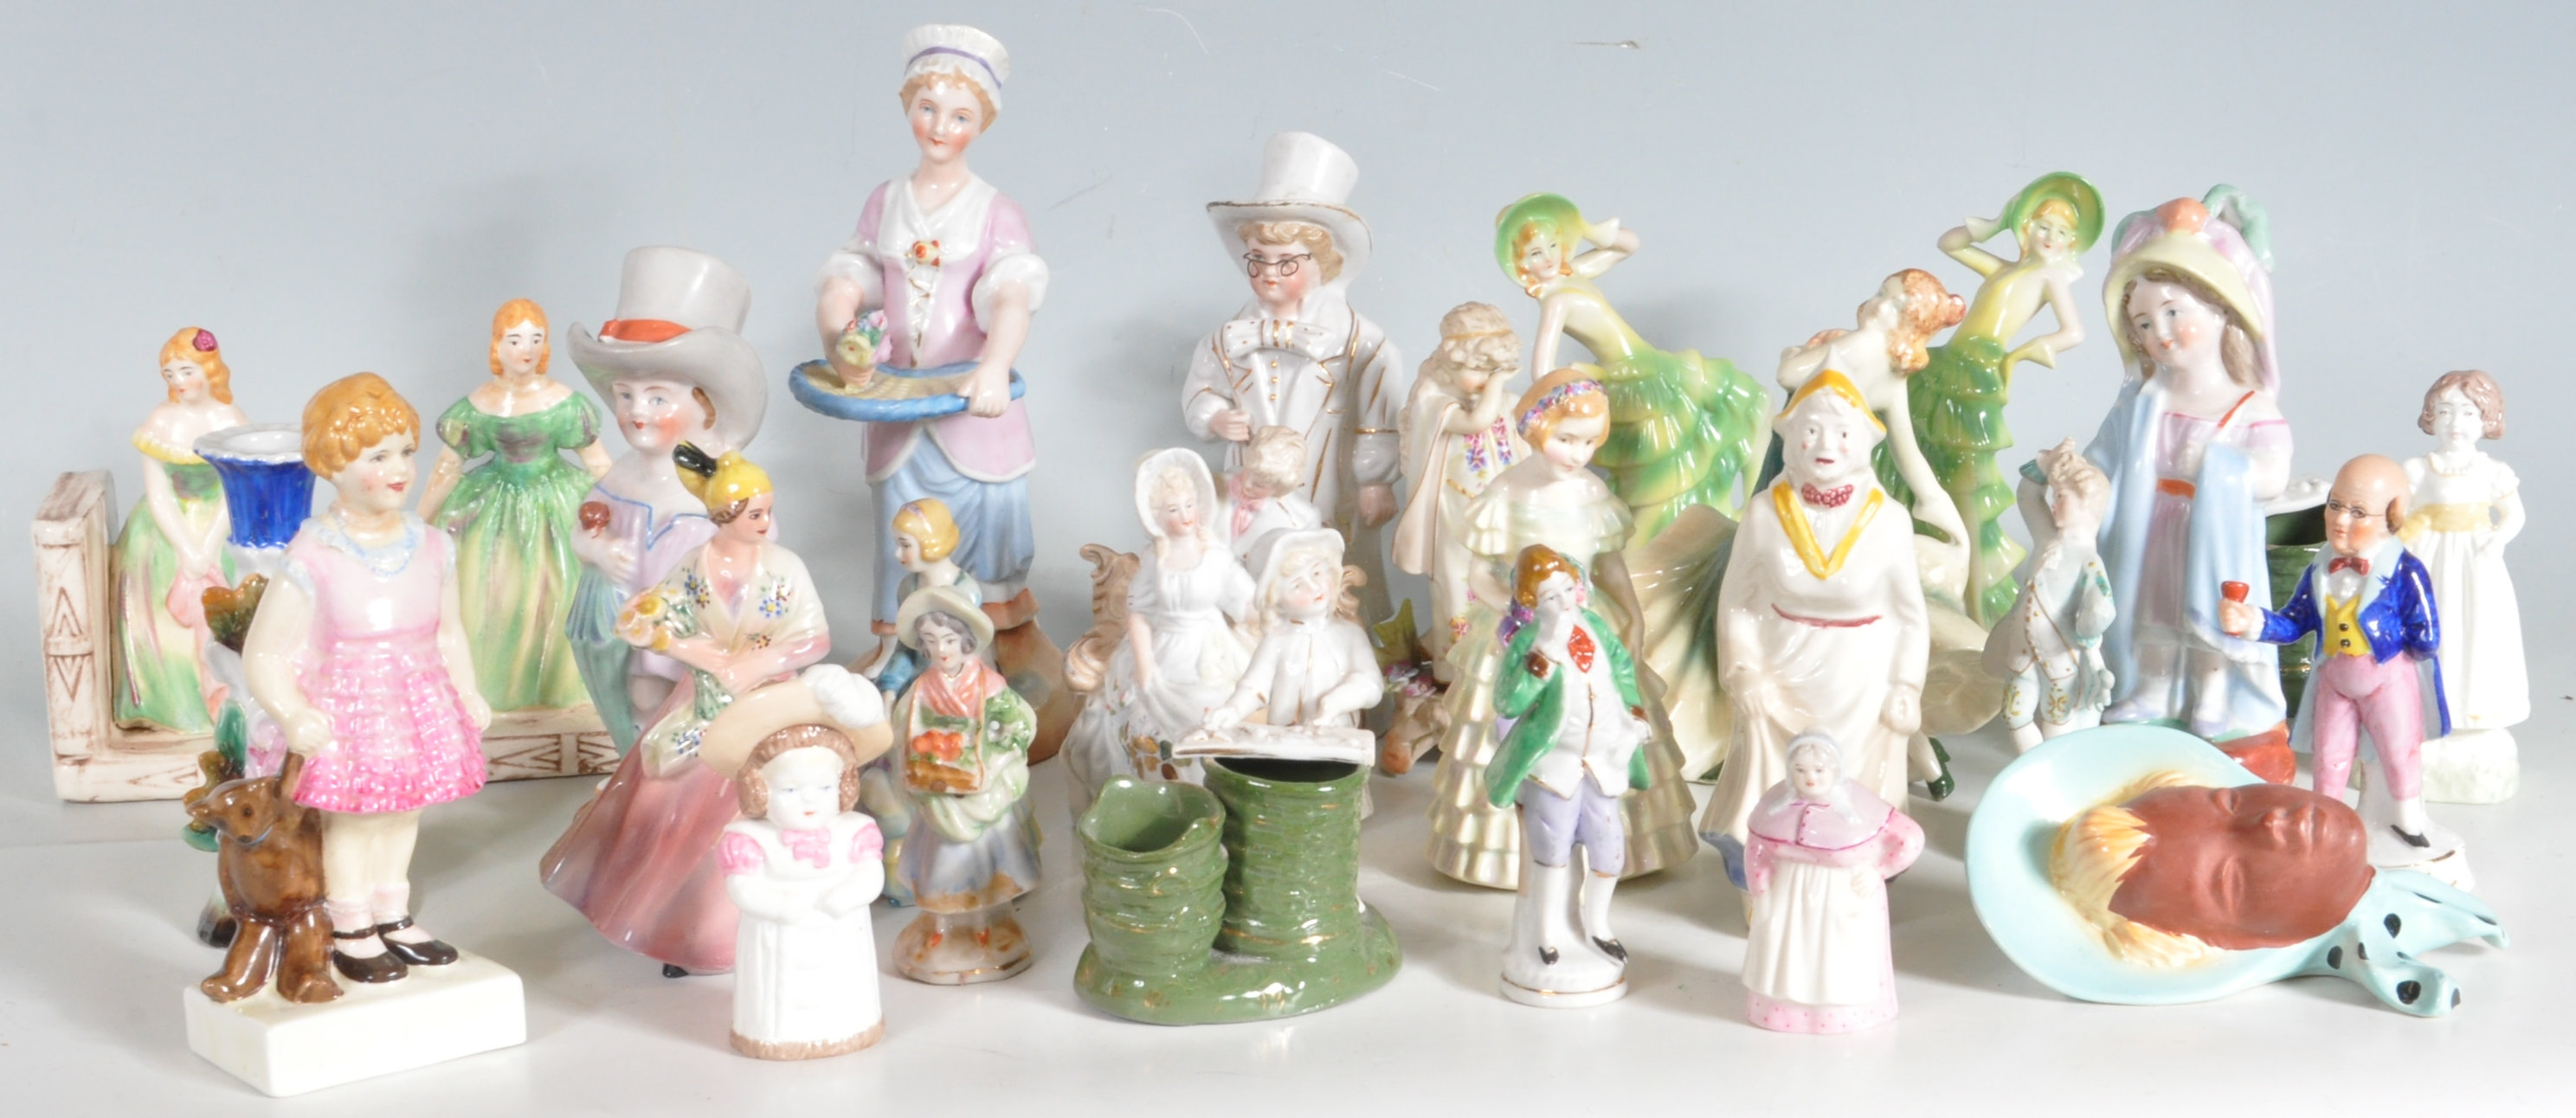 LARGE COLLECTION OF VINTAGE CERMARIC FIGURINES